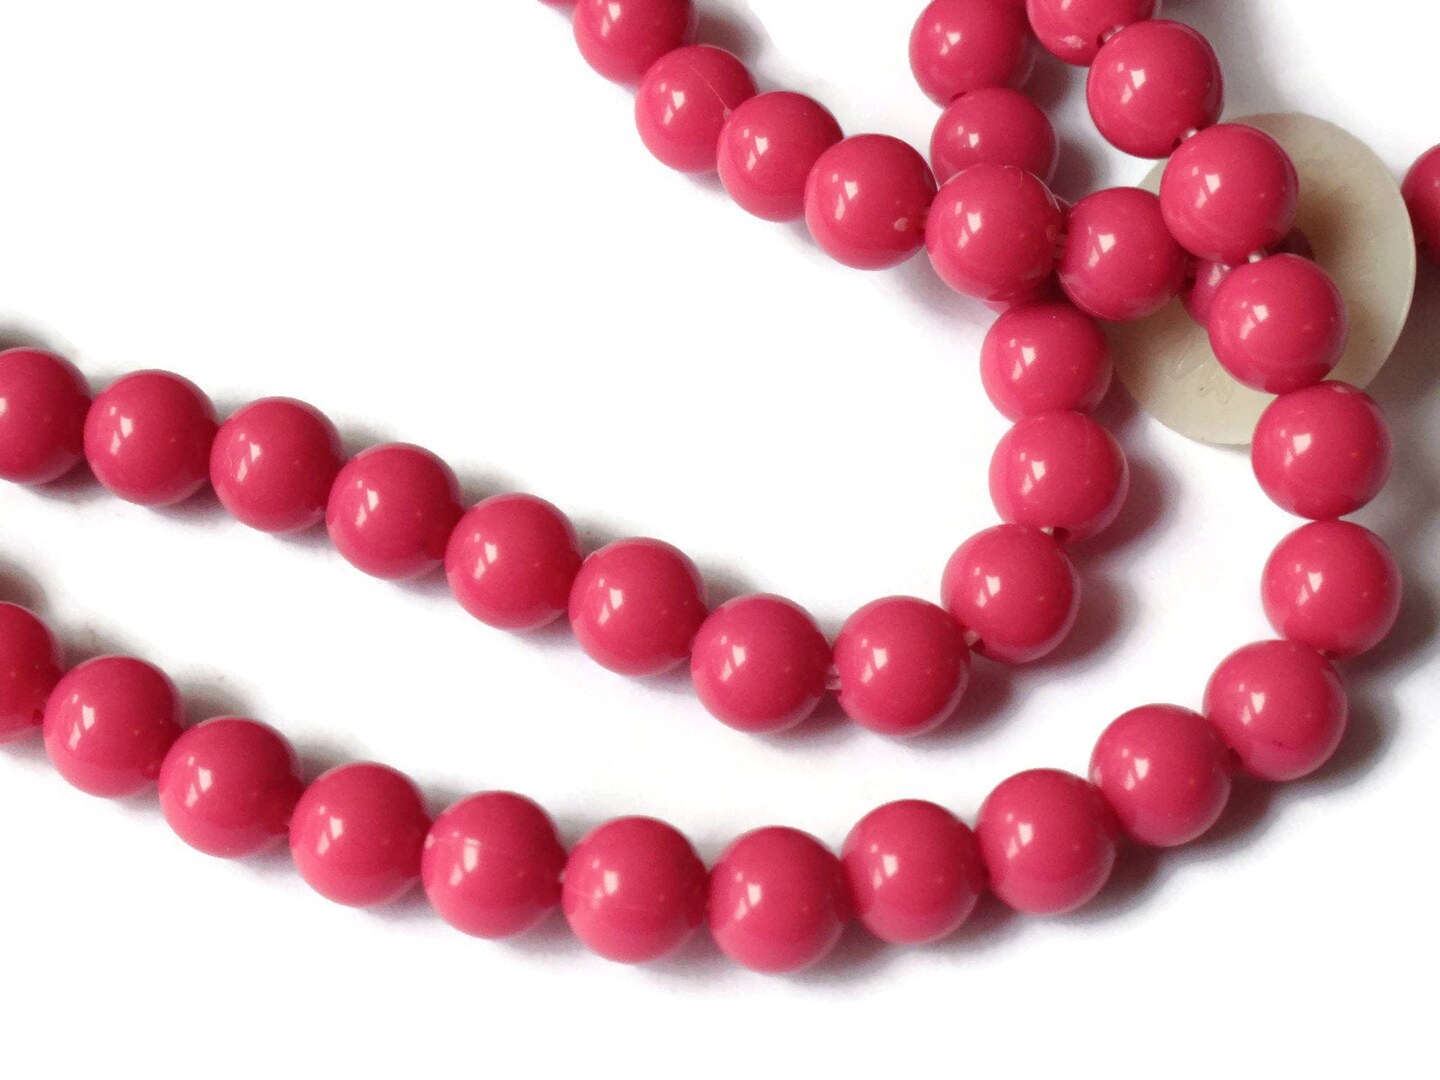 135 6mm Round Pink Vintage Plastic Beads 31 Inch Full Strand Ball Beads Acrylic Beads